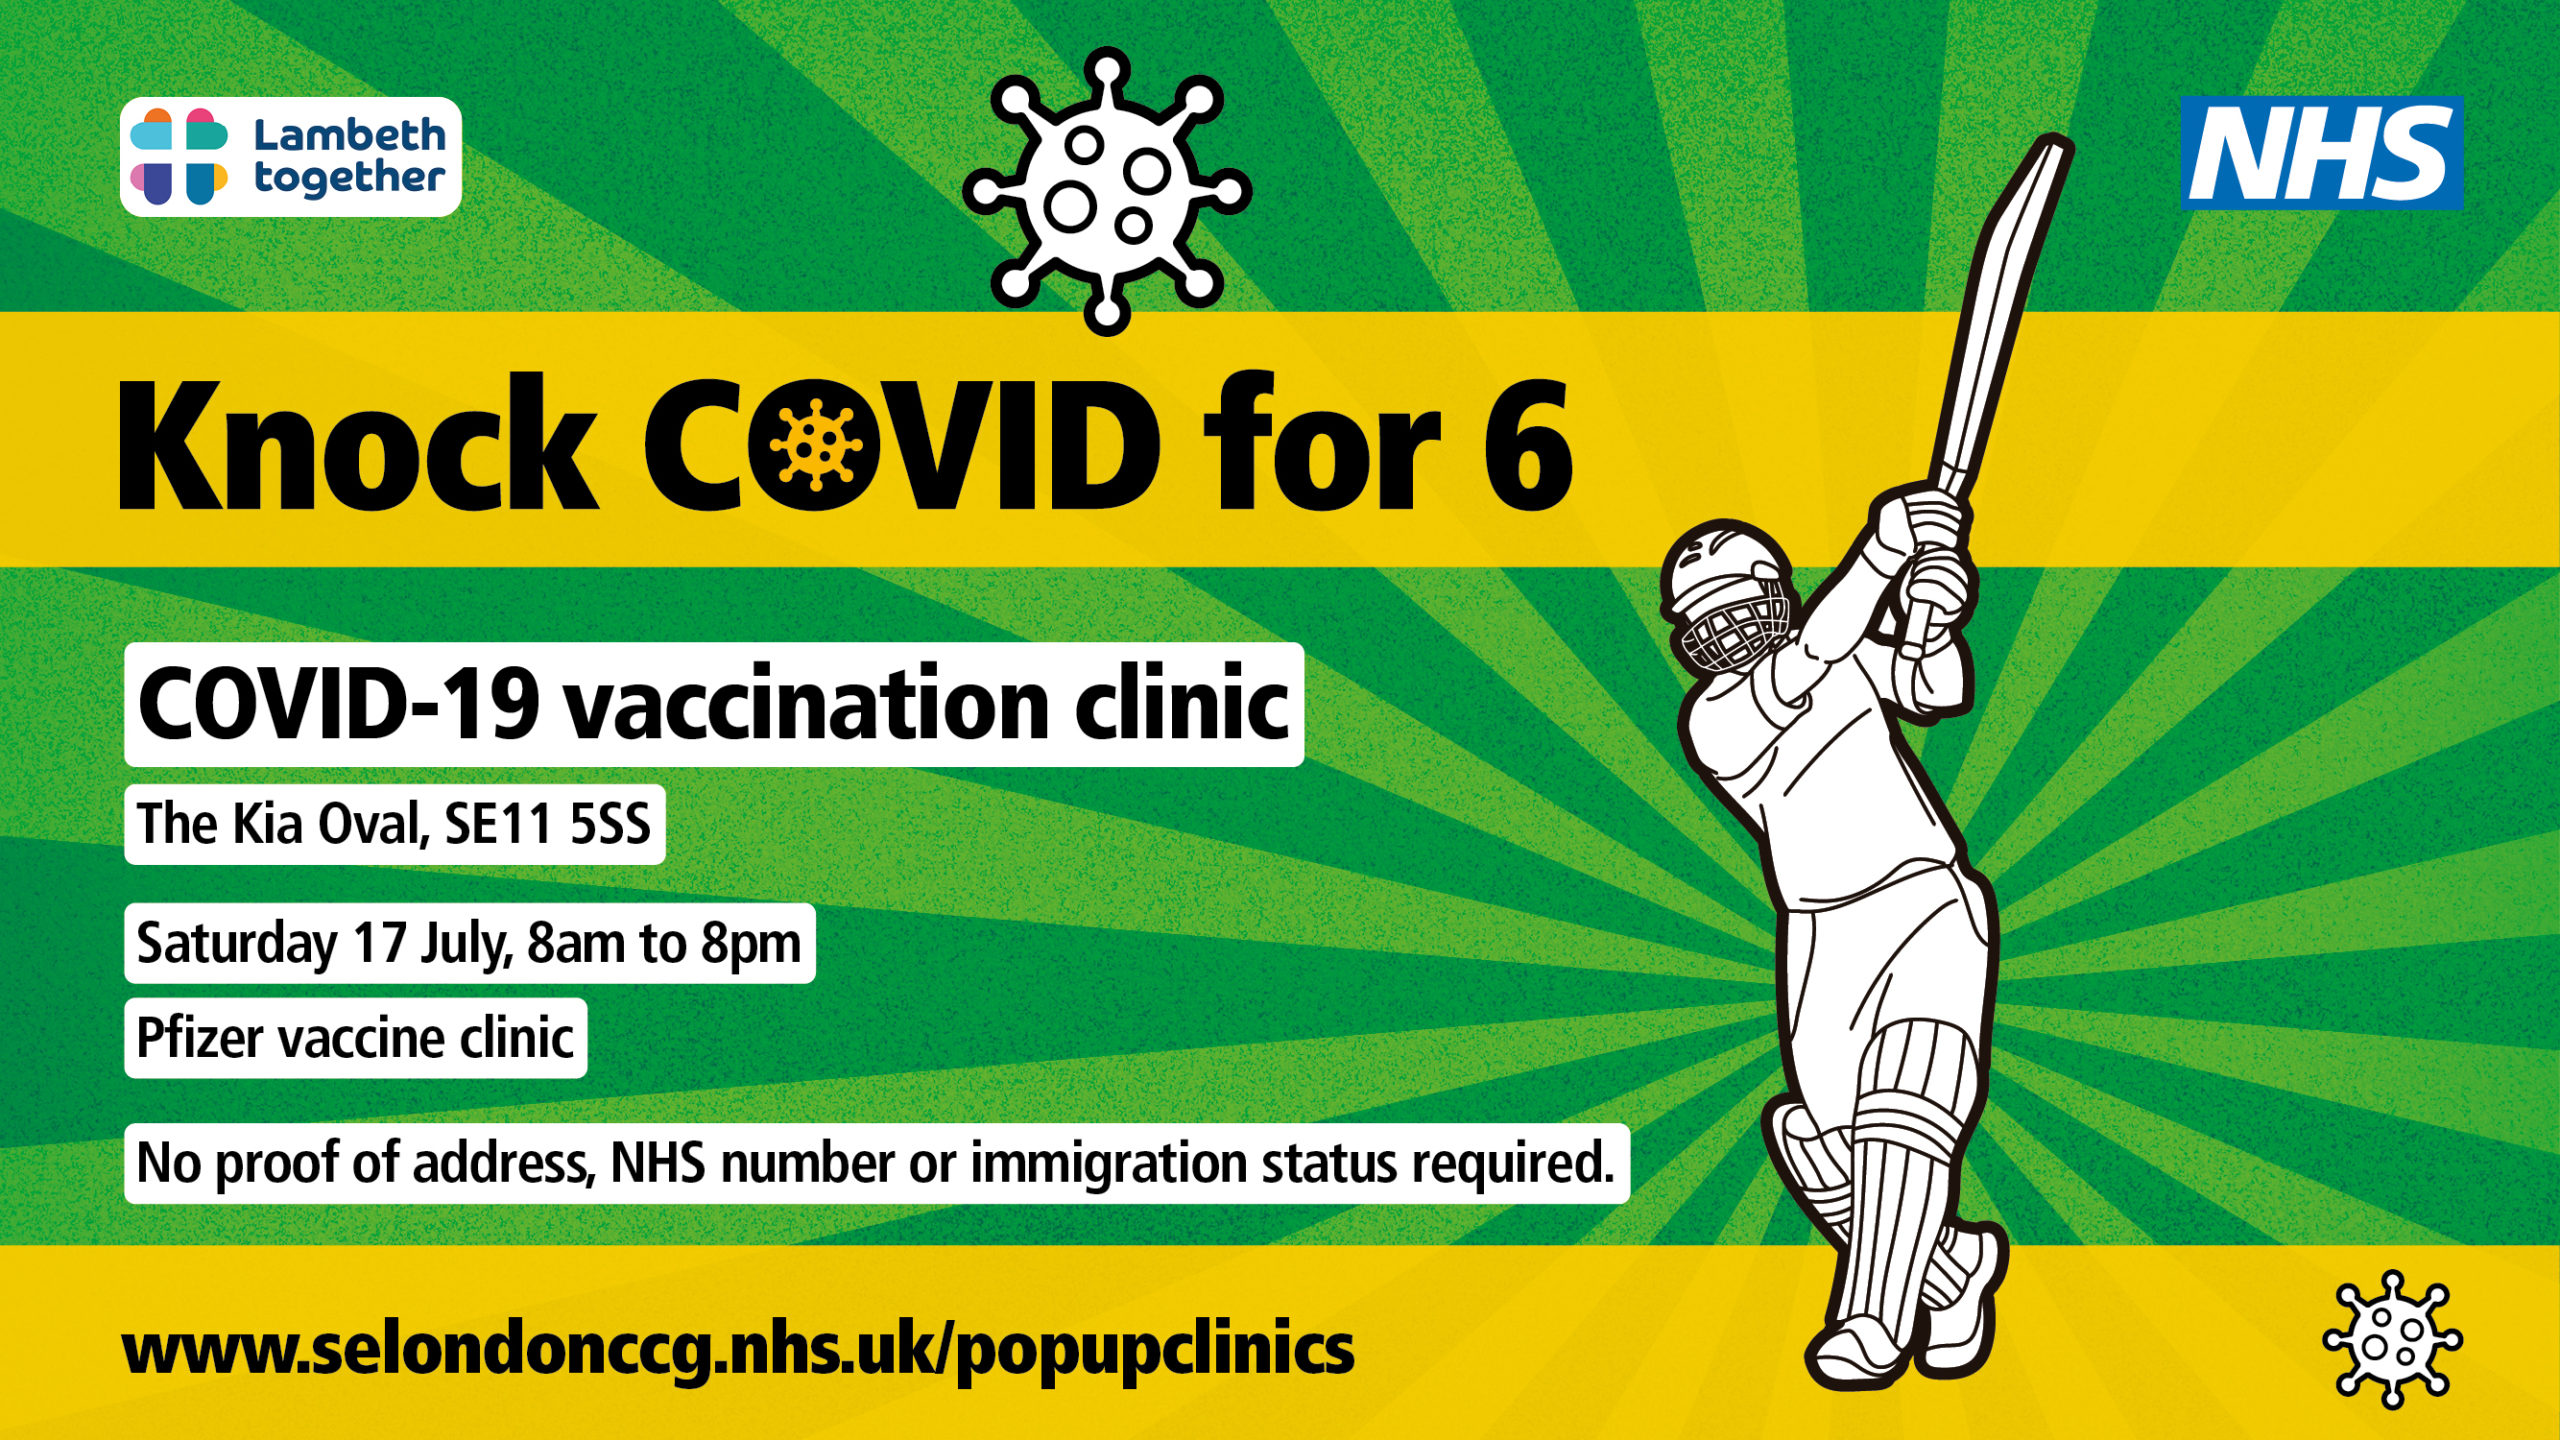 Get your Covid vaccine here on Saturday